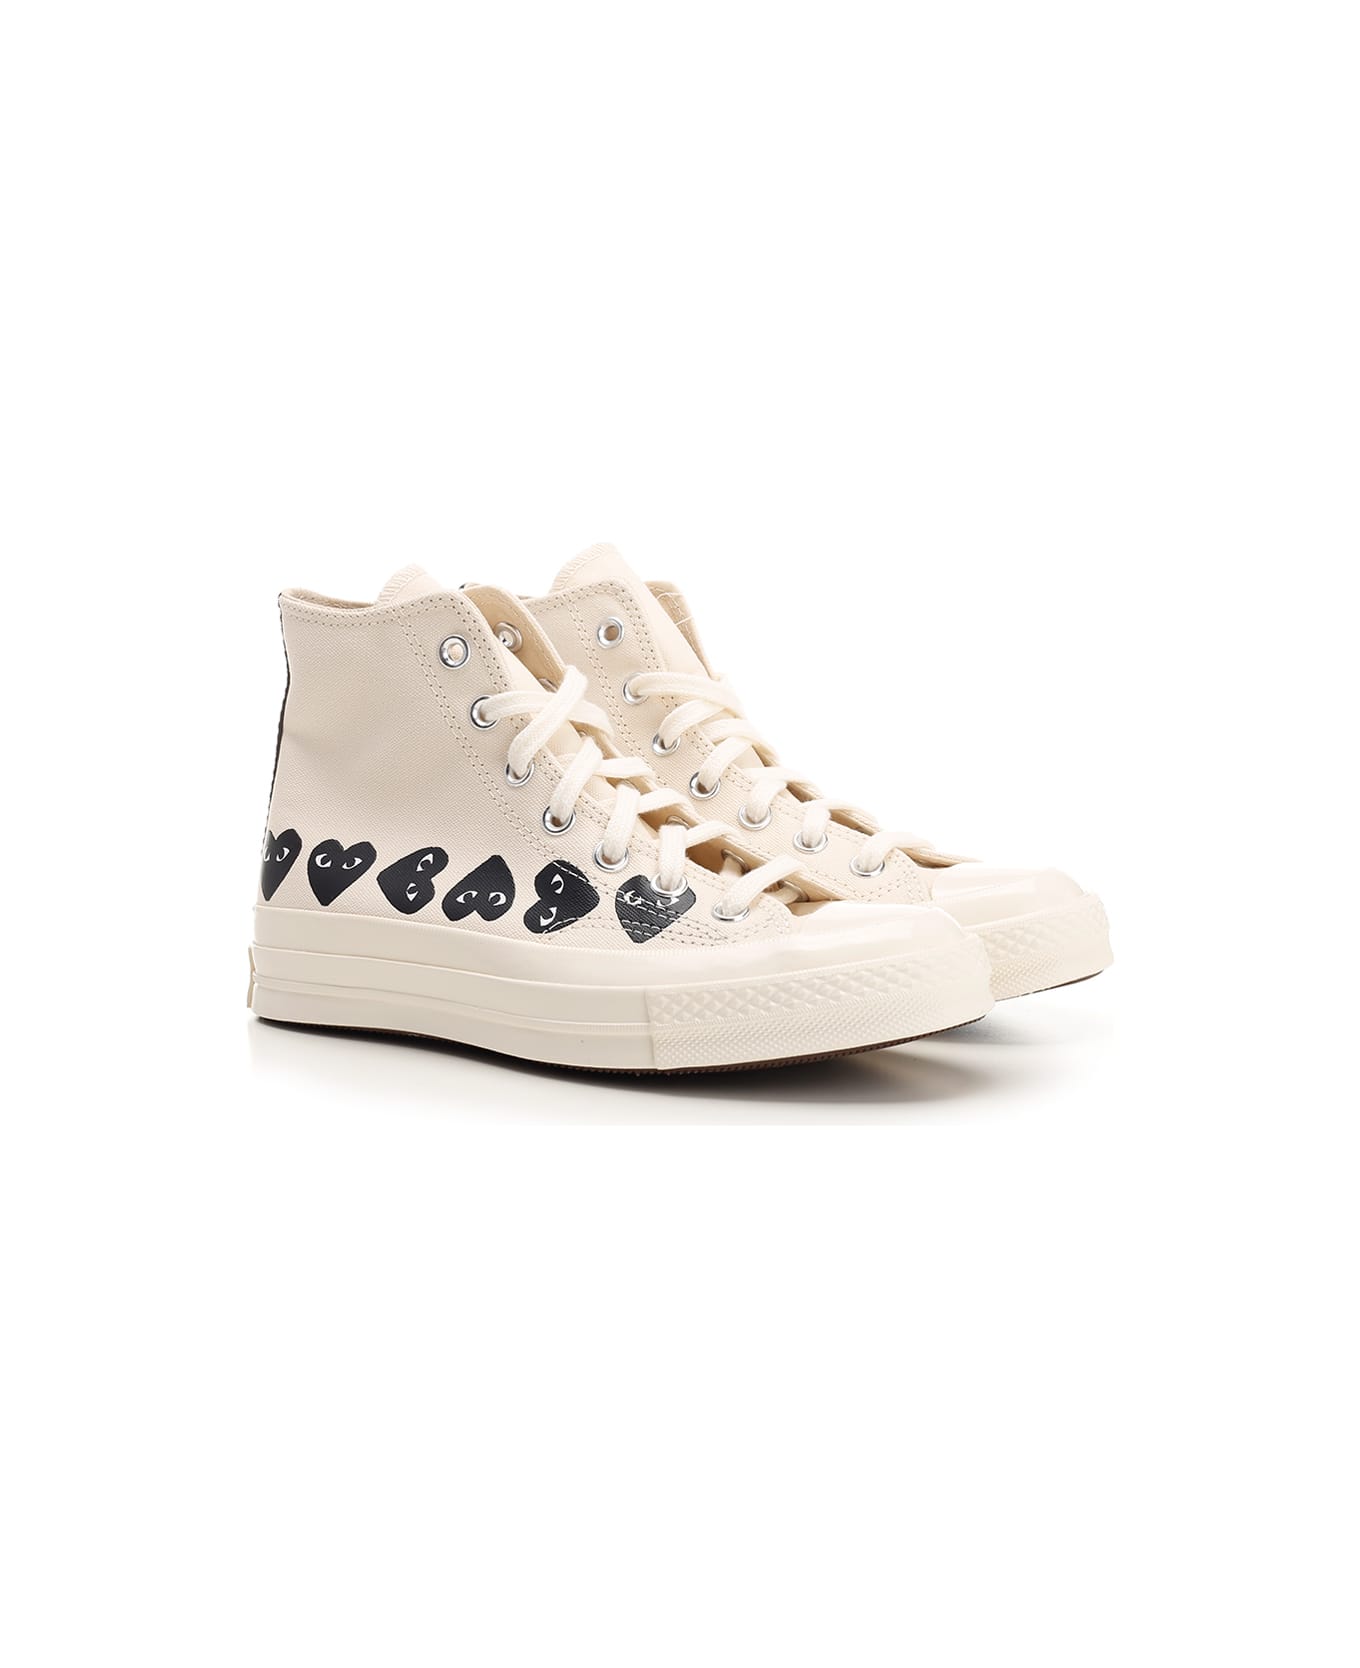 Comme des Garçons Play Ivory "chuck Taylor" High Top Sneakers - White